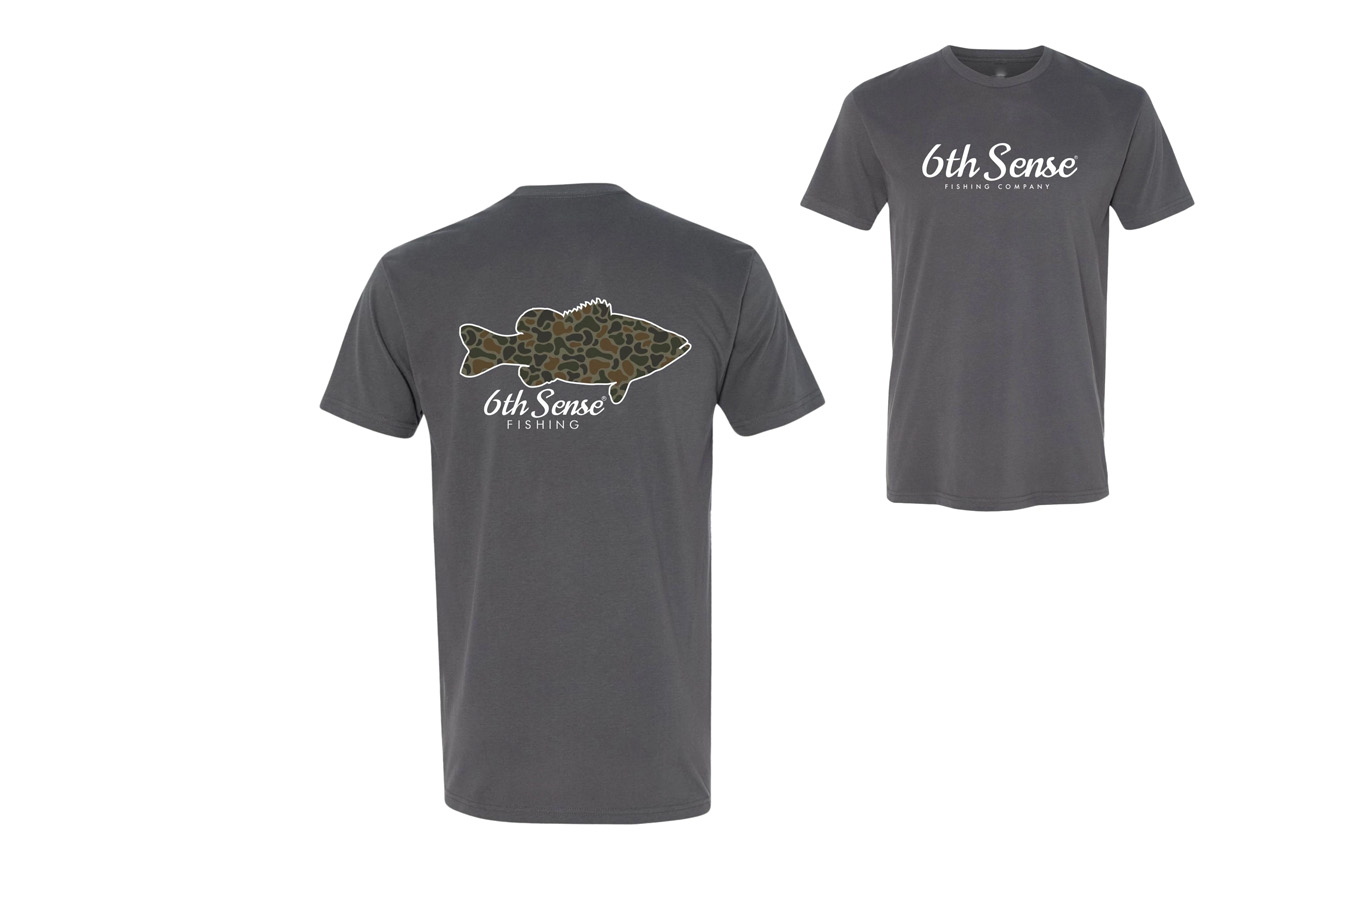 6th Sense Fish Camo Tee for Sale, Online Clothing Store